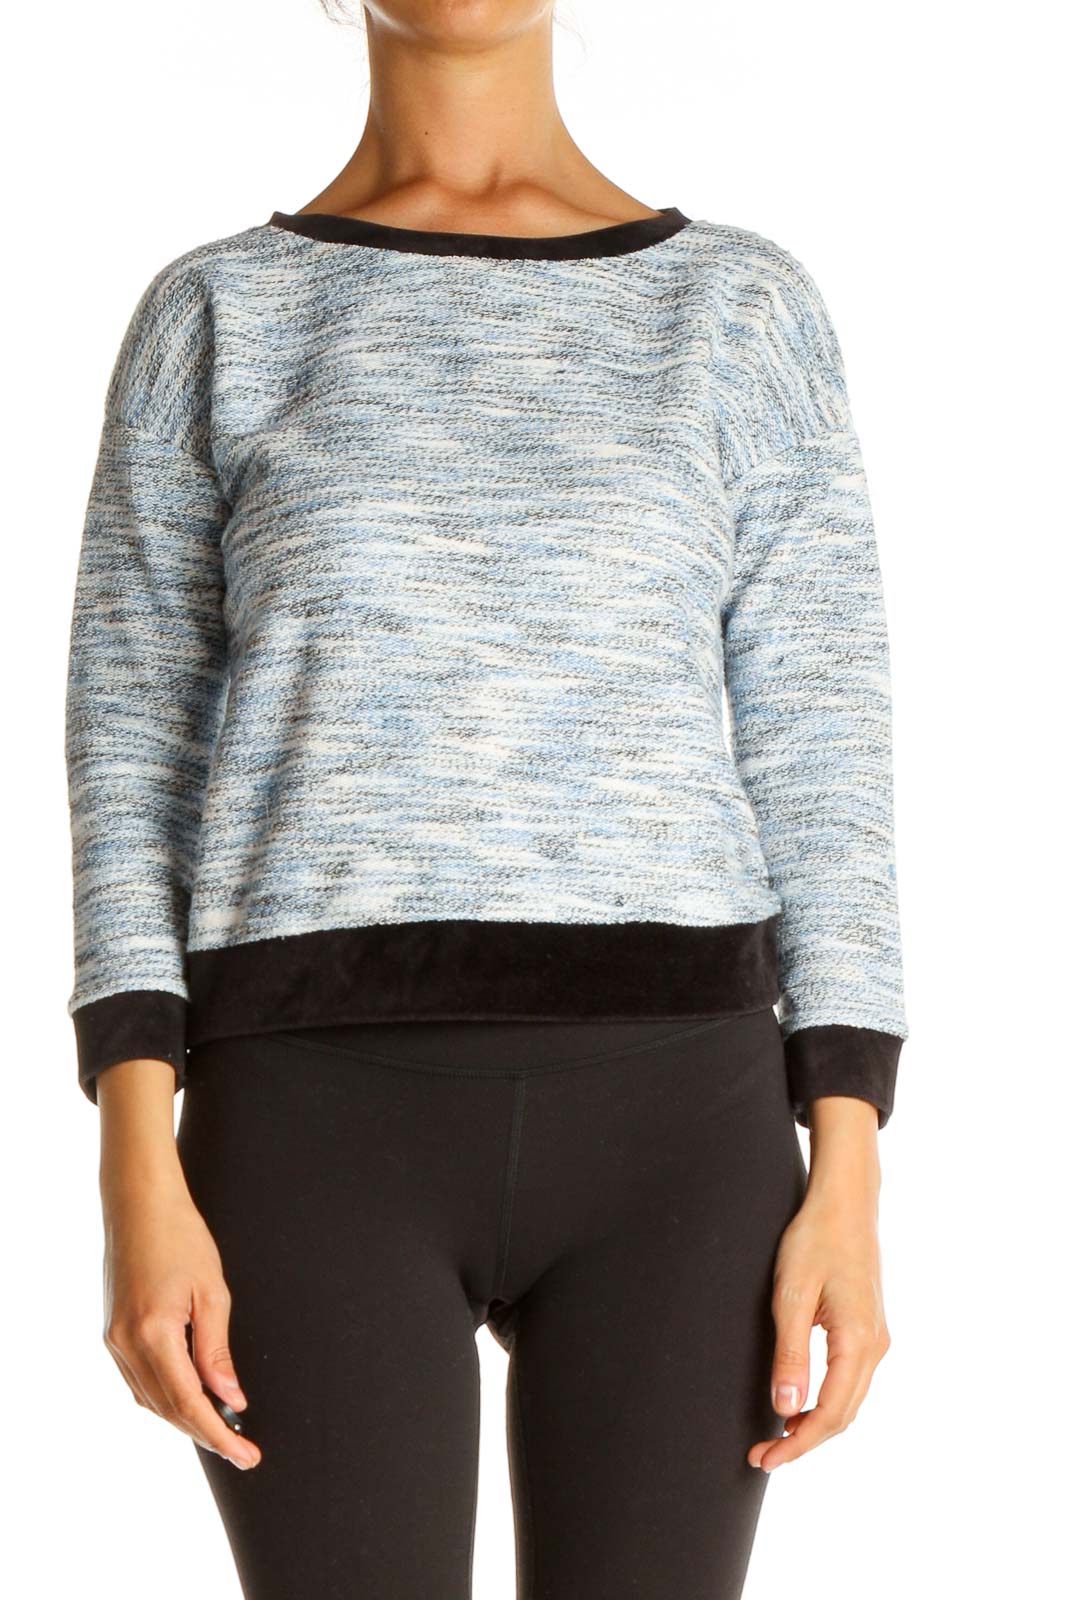 Blue Textured Retro Sweater Front